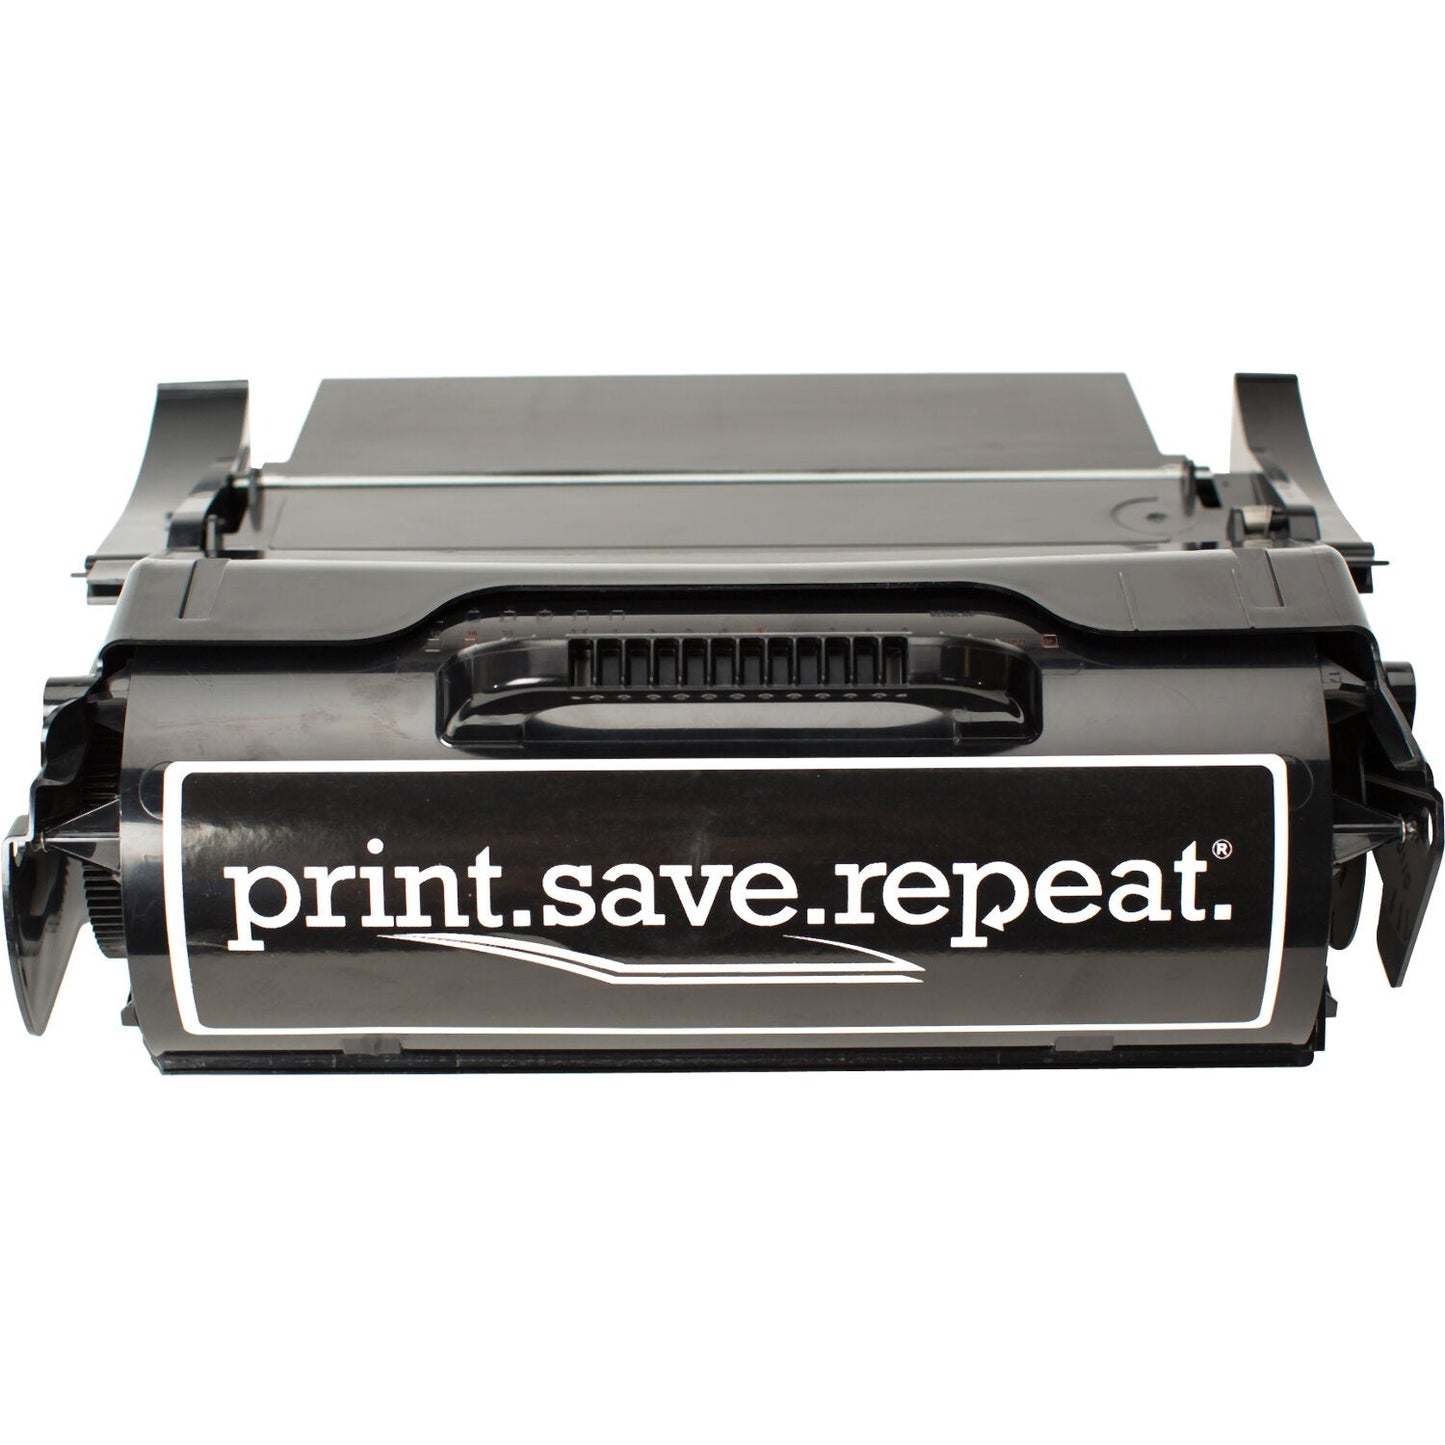 Print.Save.Repeat. Lexmark T650H87G High Yield Remanufactured Toner Cartridge for T650, T652, T654, T656 [25,000 Pages]